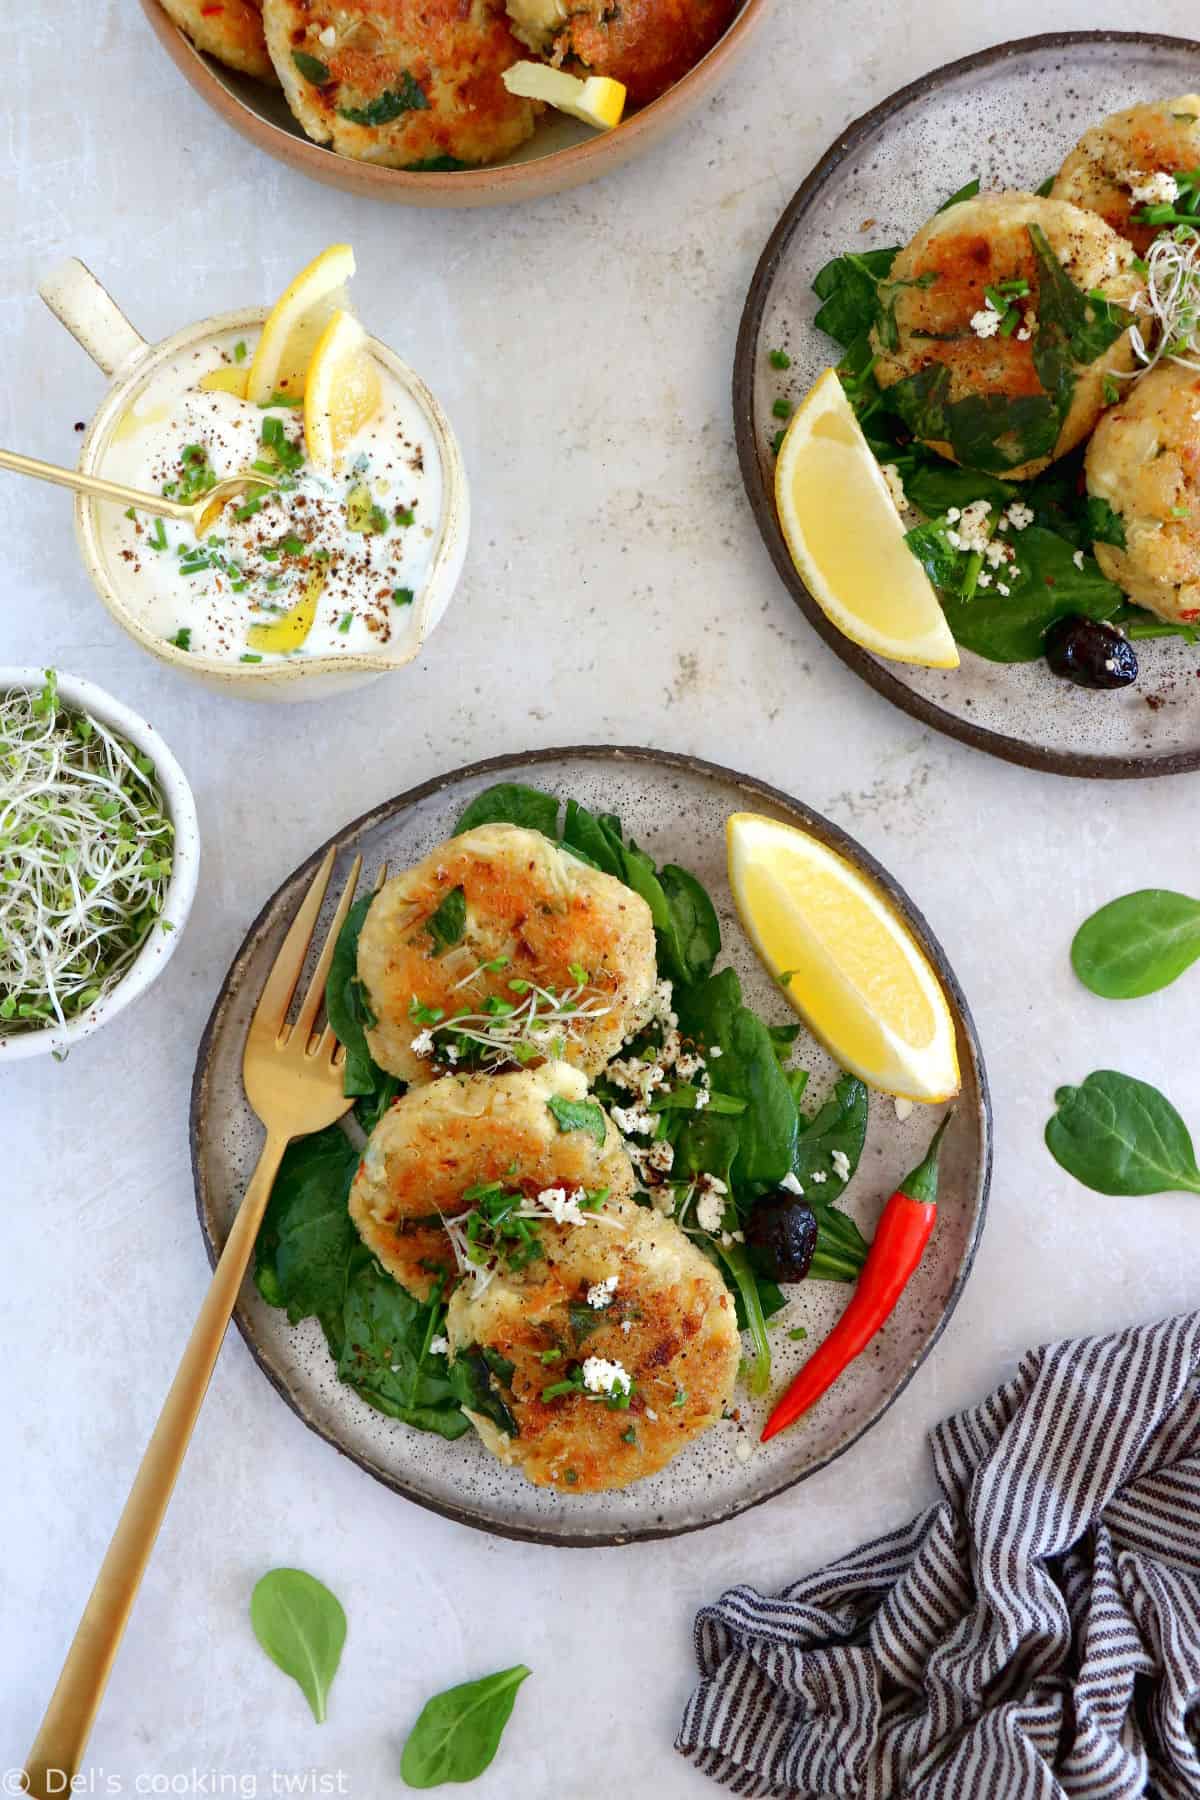 Spinach and feta quinoa patties are vegetarian, nutritious, and a great meatless option everyone loves. Serve with the lemon yogurt dip!